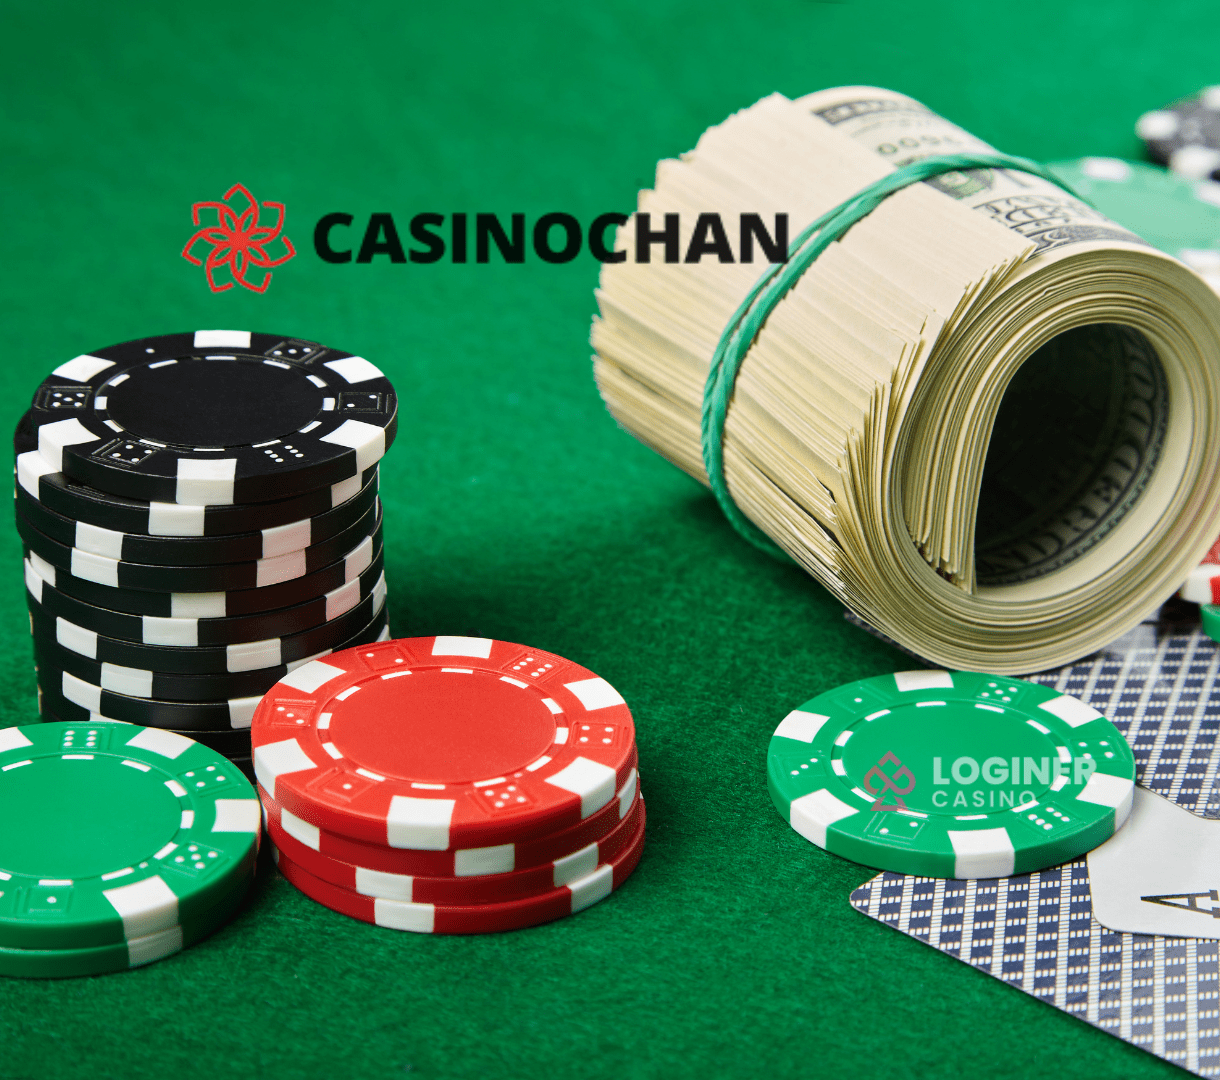 What is the most reputable gambling site Casinochan available today?